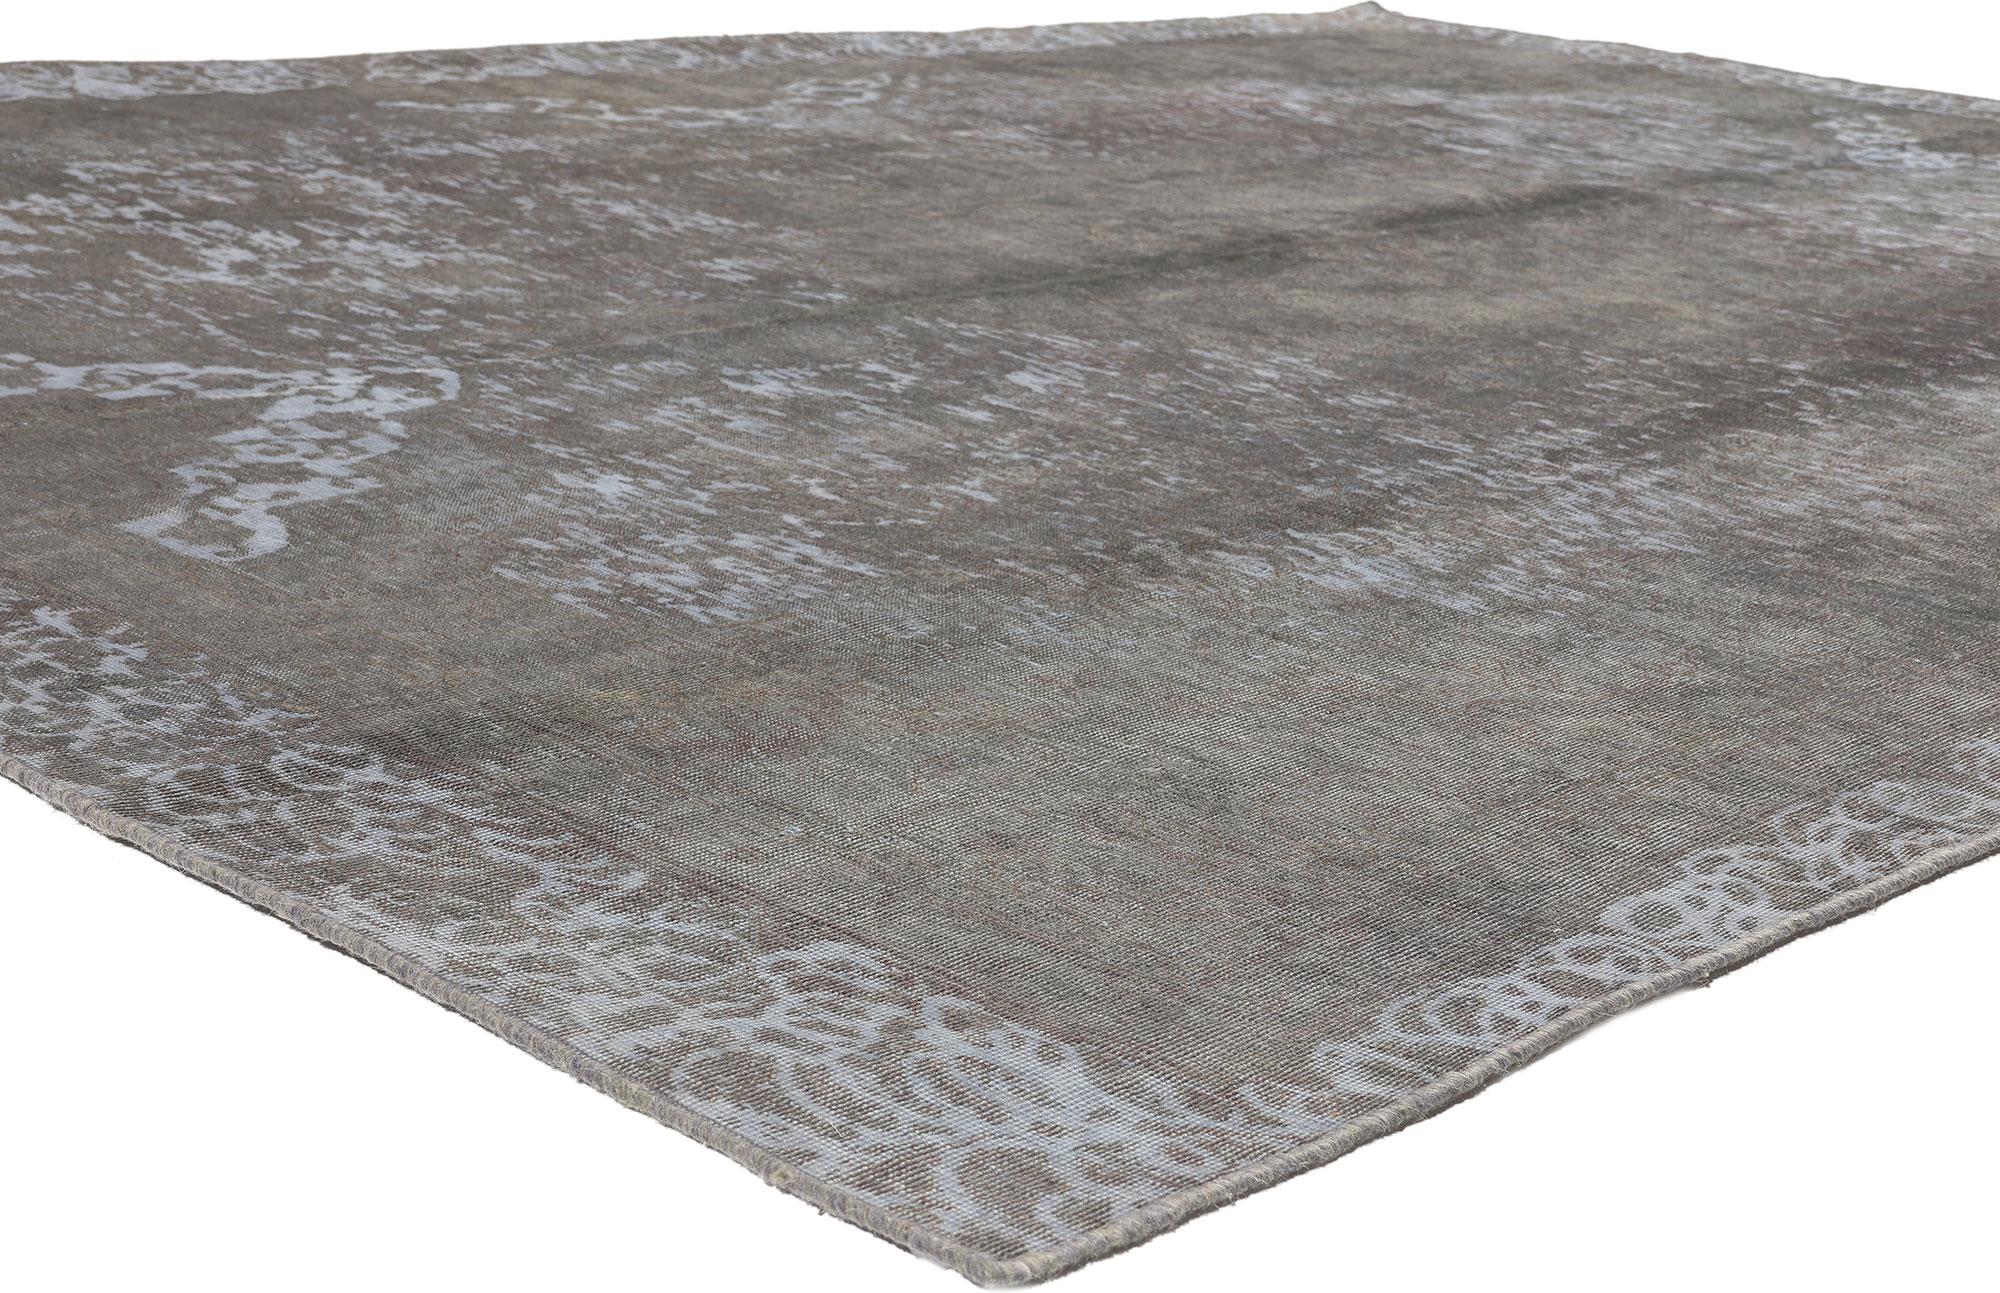 60603 Vintage Turkish Overdyed Rug, 08’01 x 11’07. 
Relaxed refinement meets luxe utilitarian appeal in this hand knotted vintage Turkish overdyed rug. The faded botanical design and analogous color scheme work together resulting in a modern look